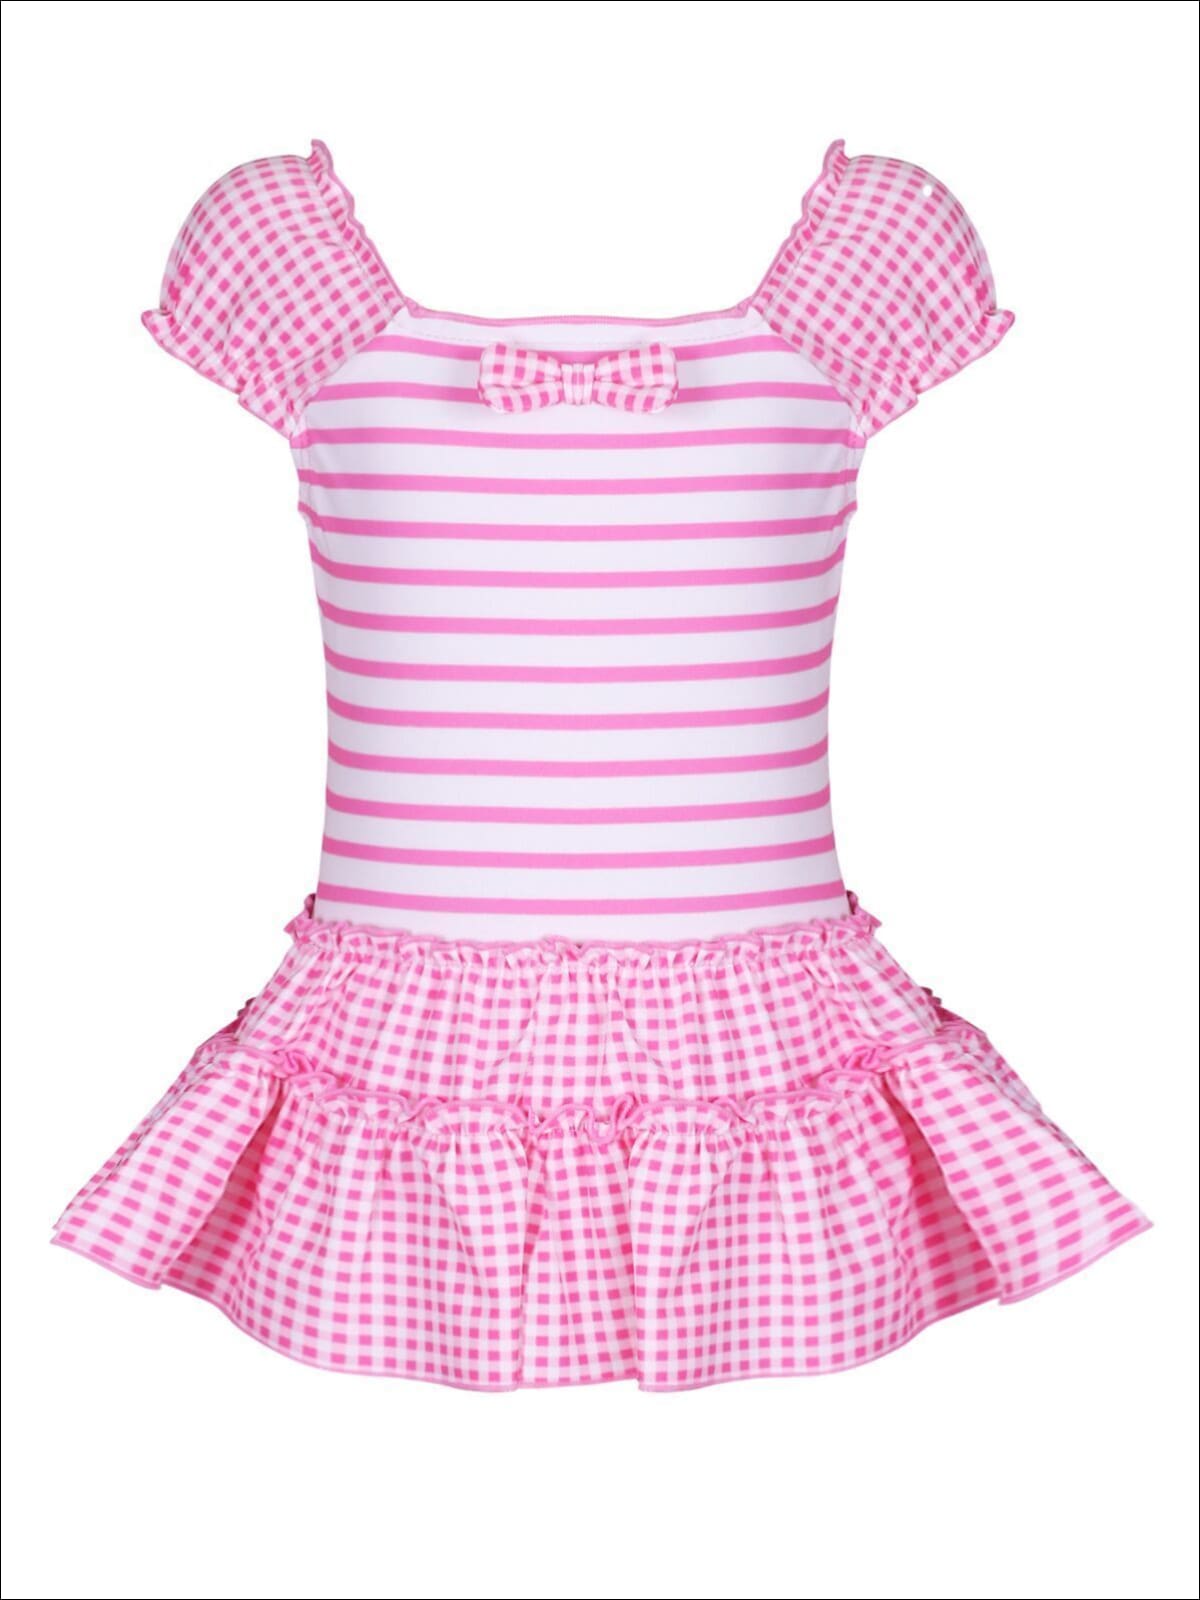 Girls Striped & Checkered Skirted One Piece with Bow Detail - Girls One Piece Swimsuit